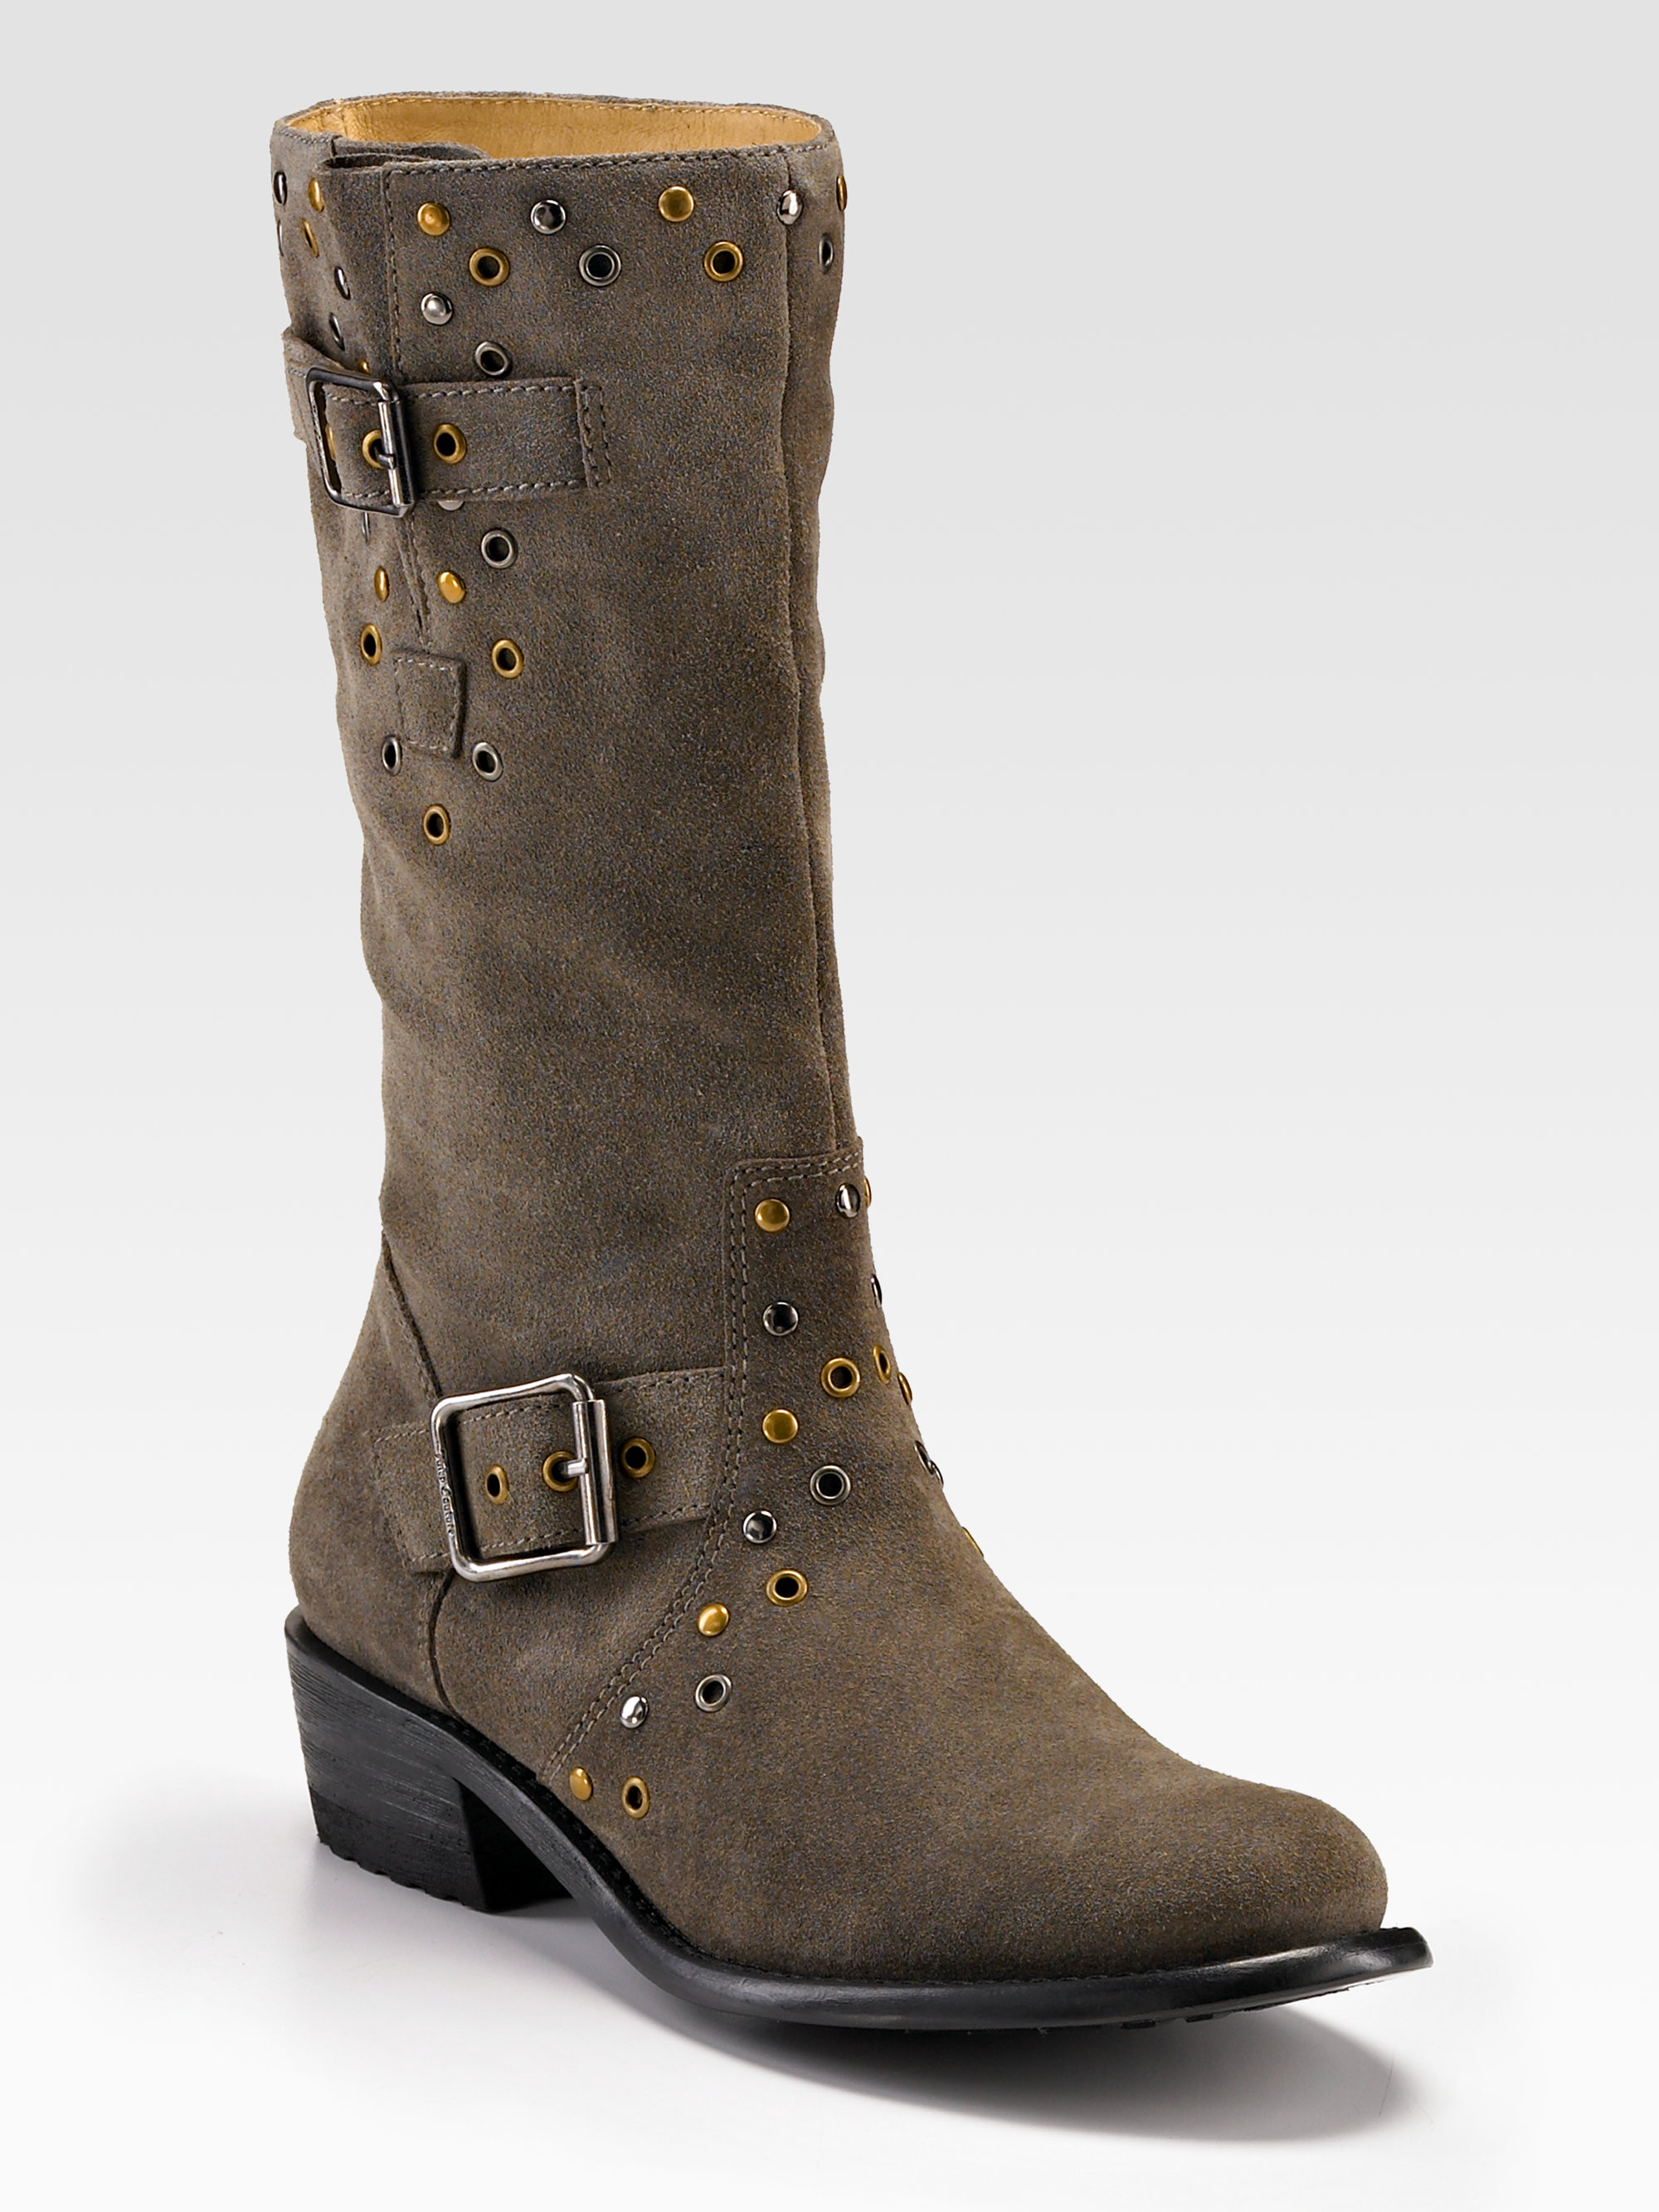 Juicy Couture Giordana Distressed Suede Boots in Gray